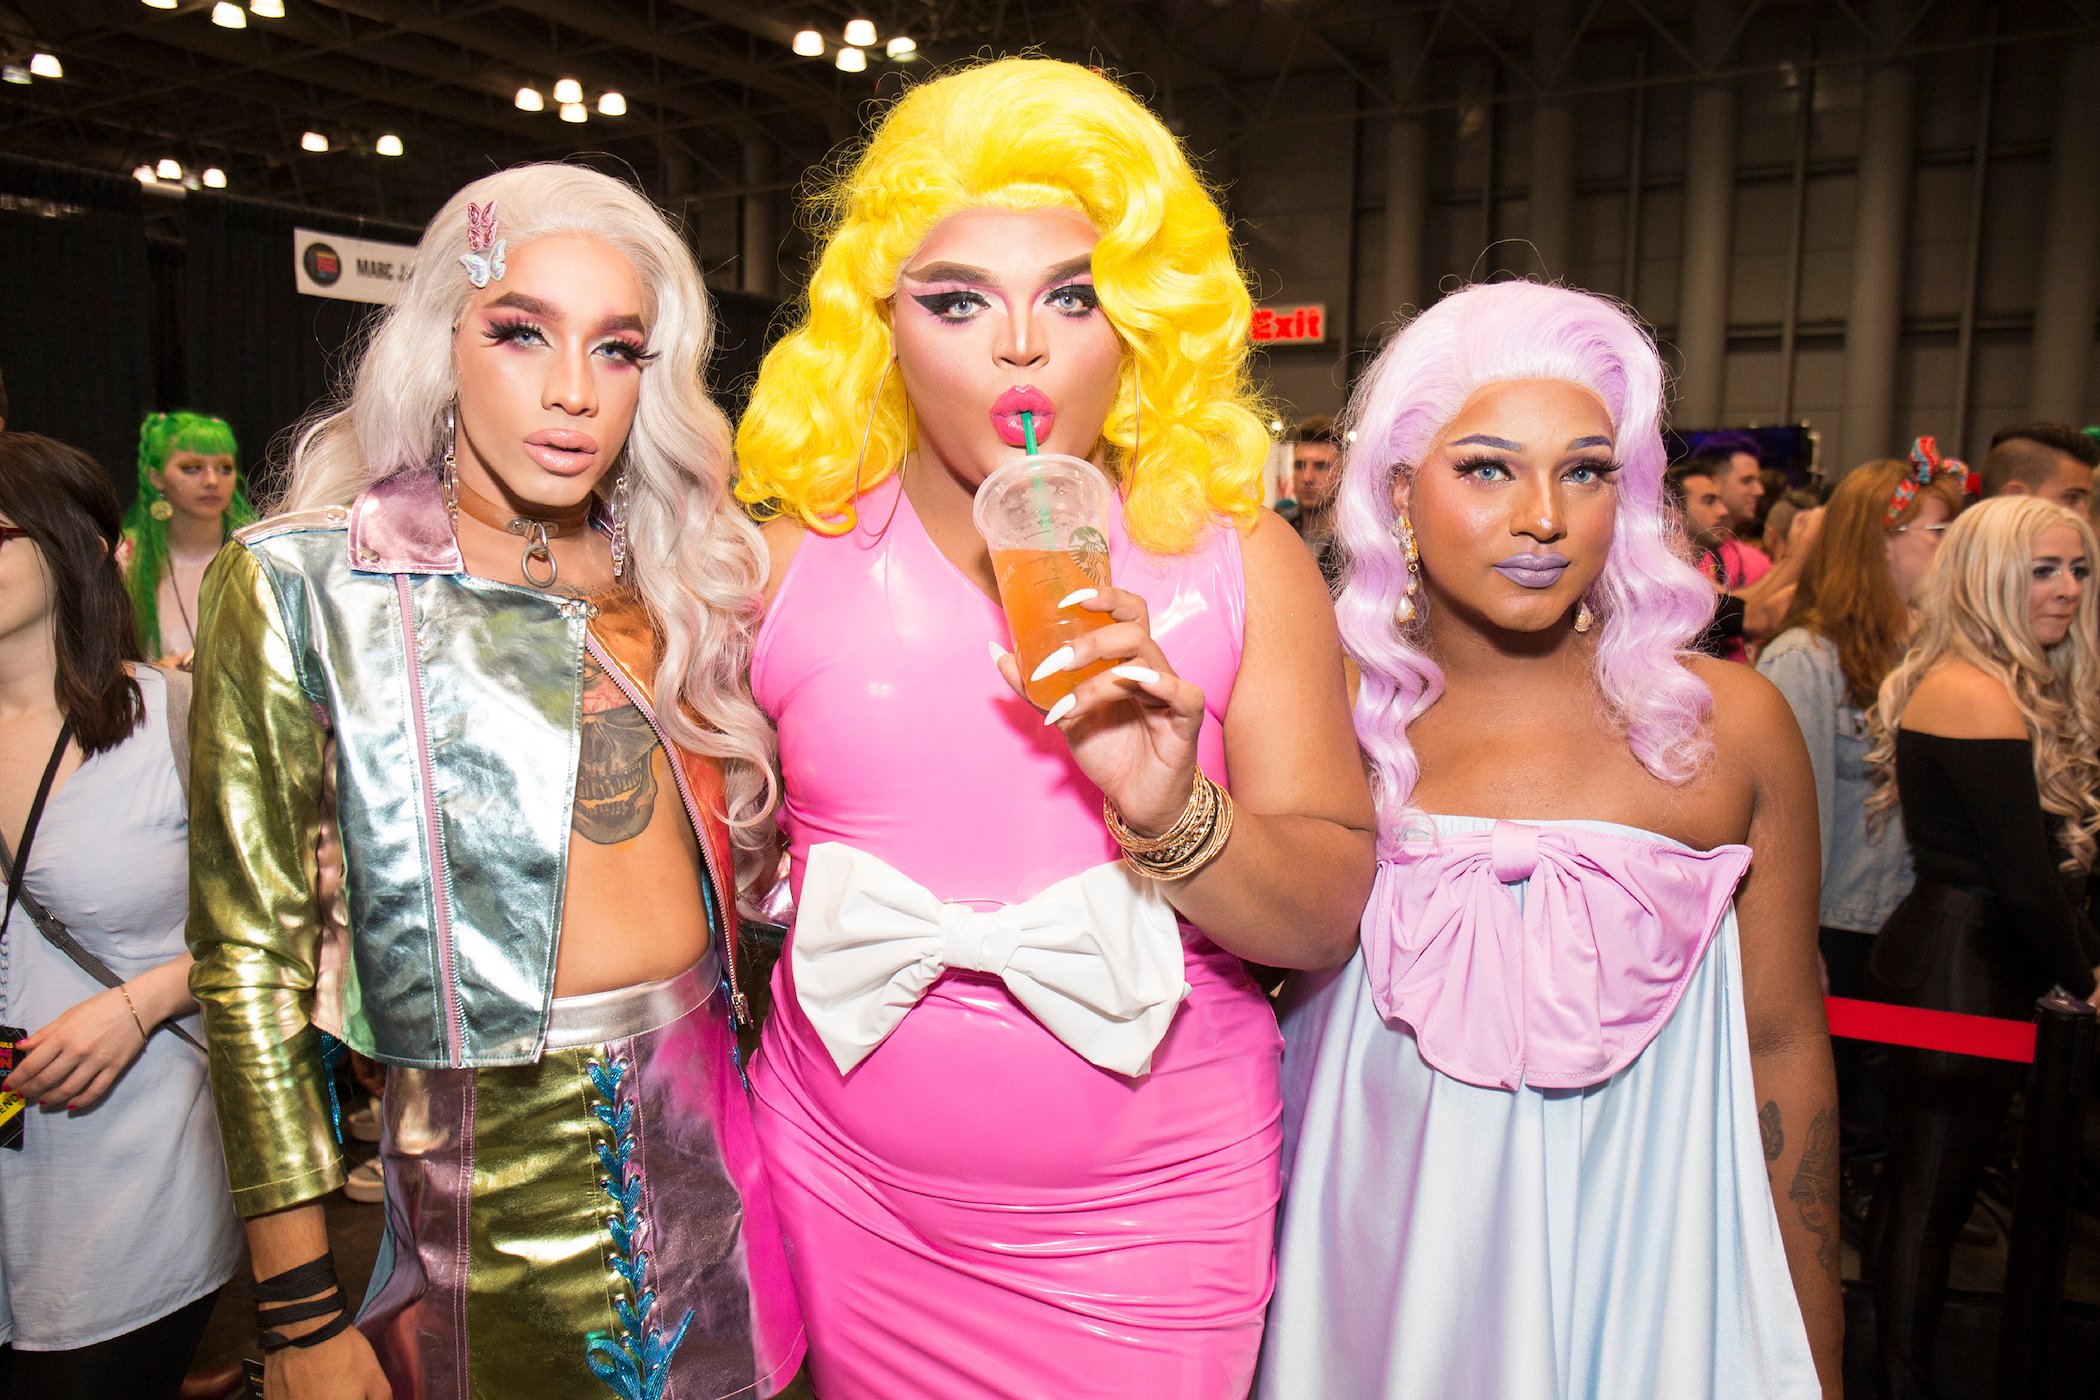 Dahlia Sin, Kandy Muse, and Momo Shade of 'Haus of AJA' attend RuPaul's DragCon NYC